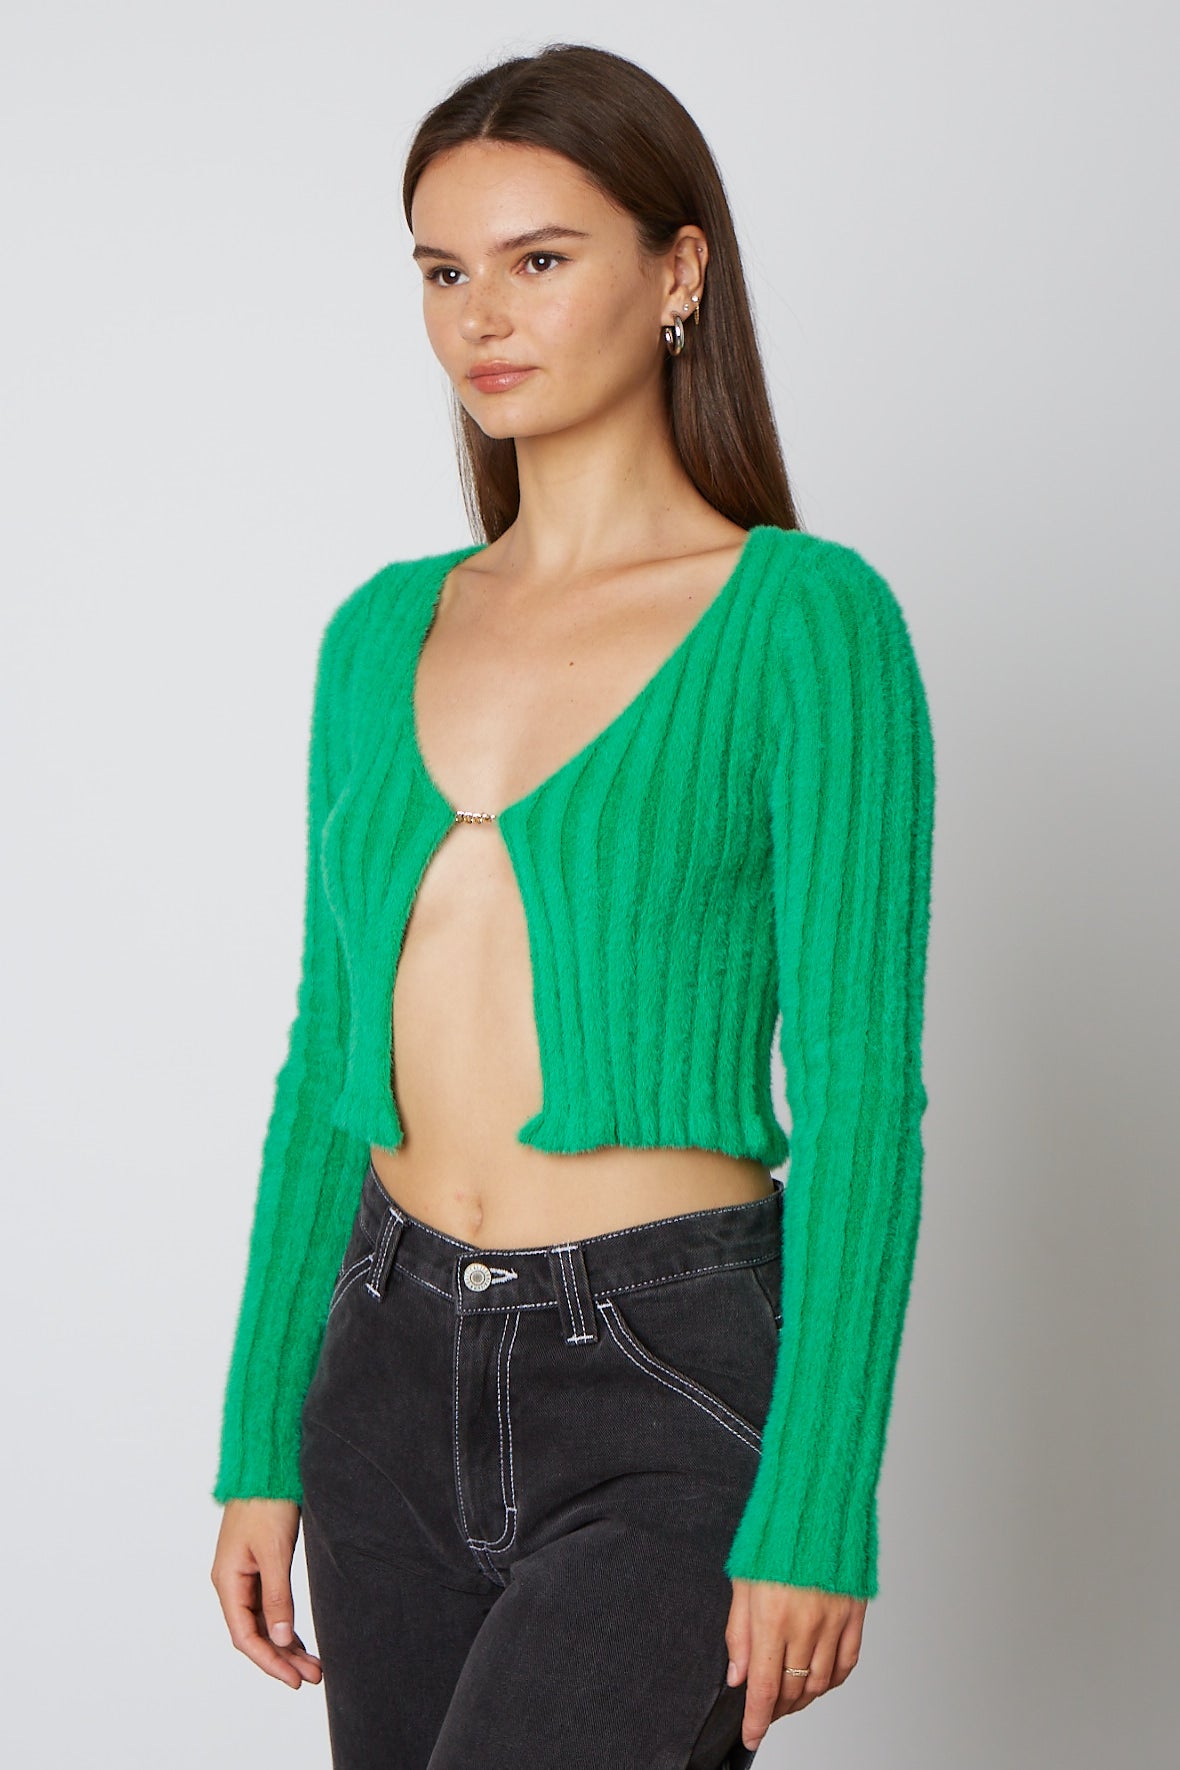 Chenille Chainlink Cardigan in Kelly Green Side View